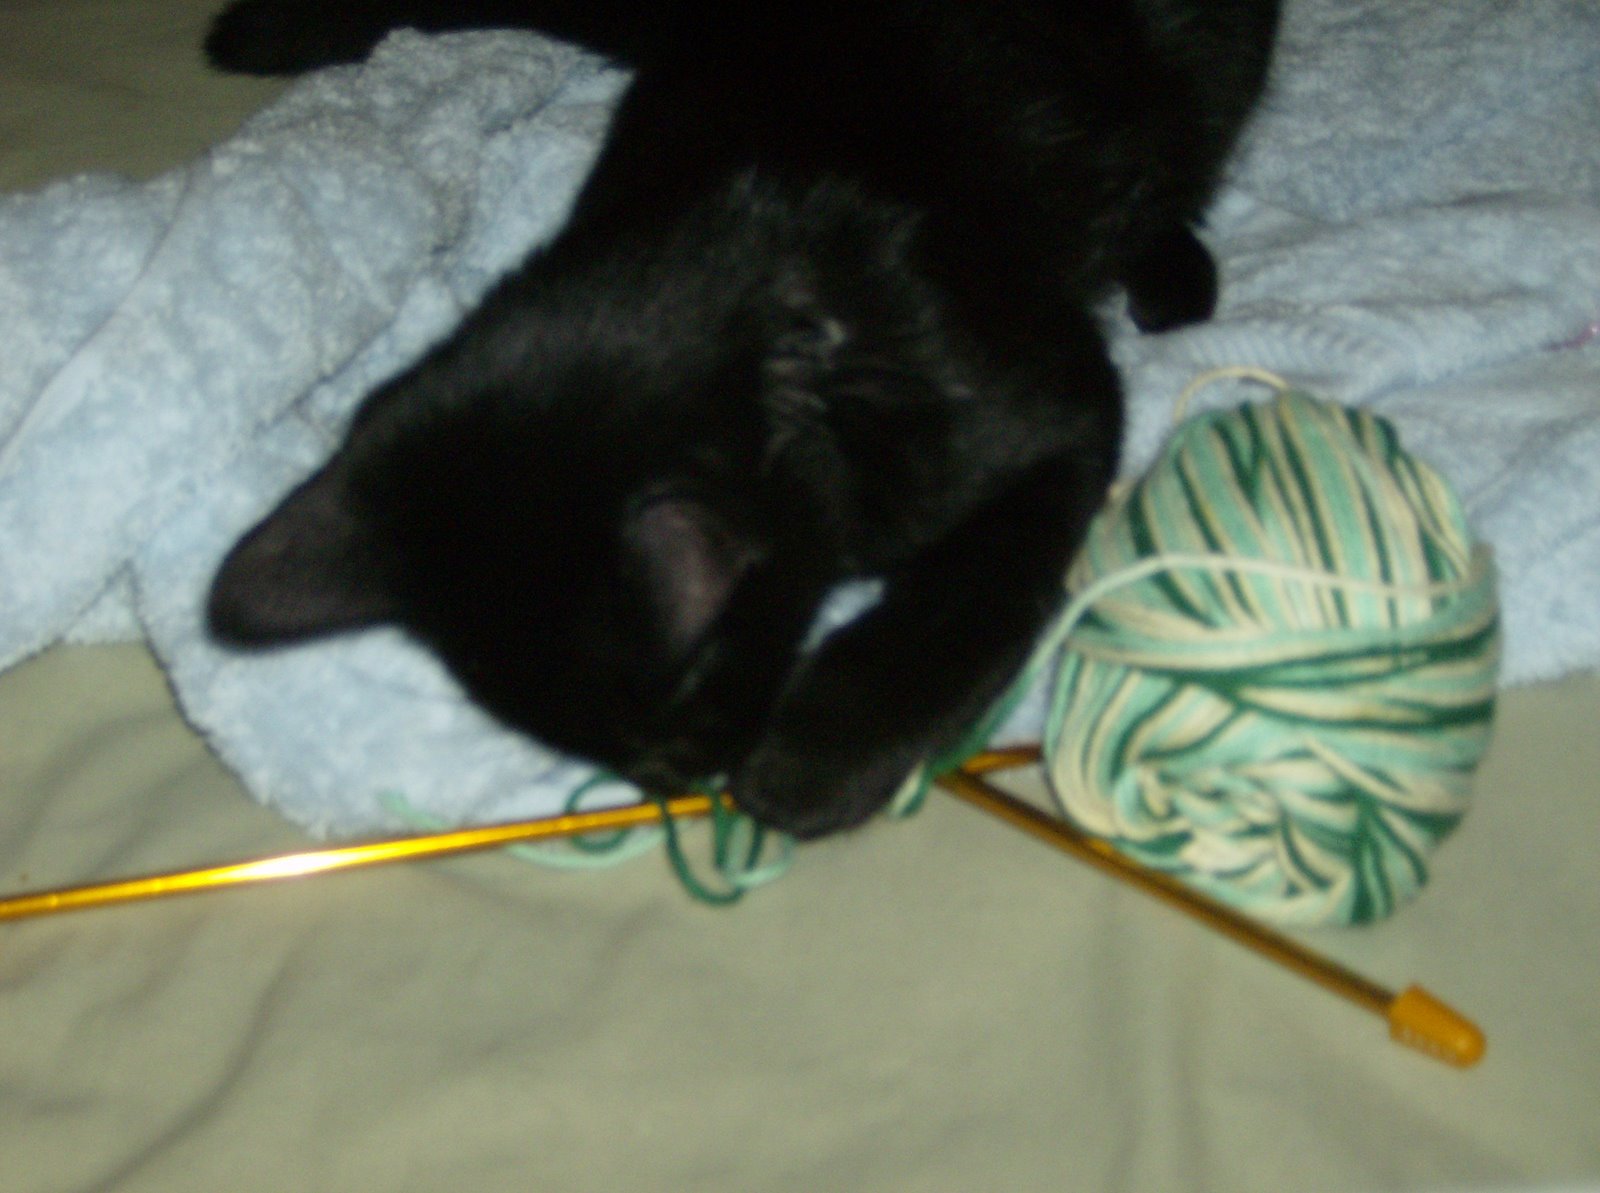 Grim wants to try knitting...